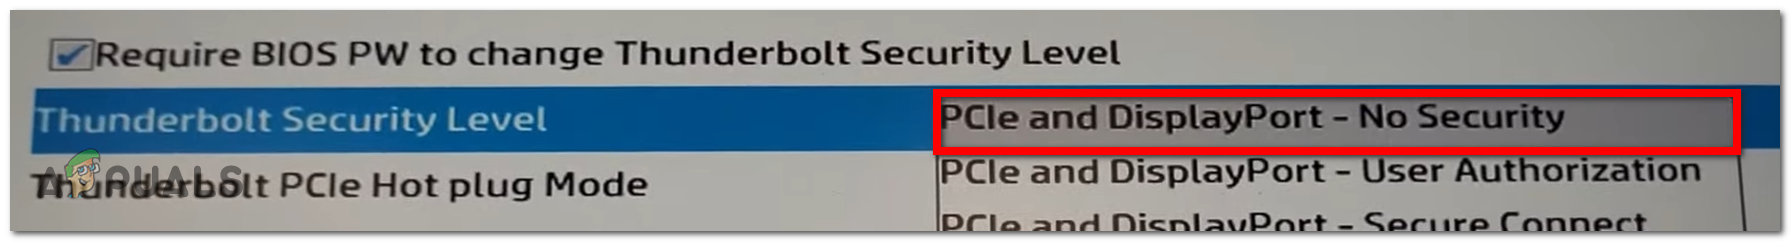 Selecting the No Security Thunderbolt Security Level